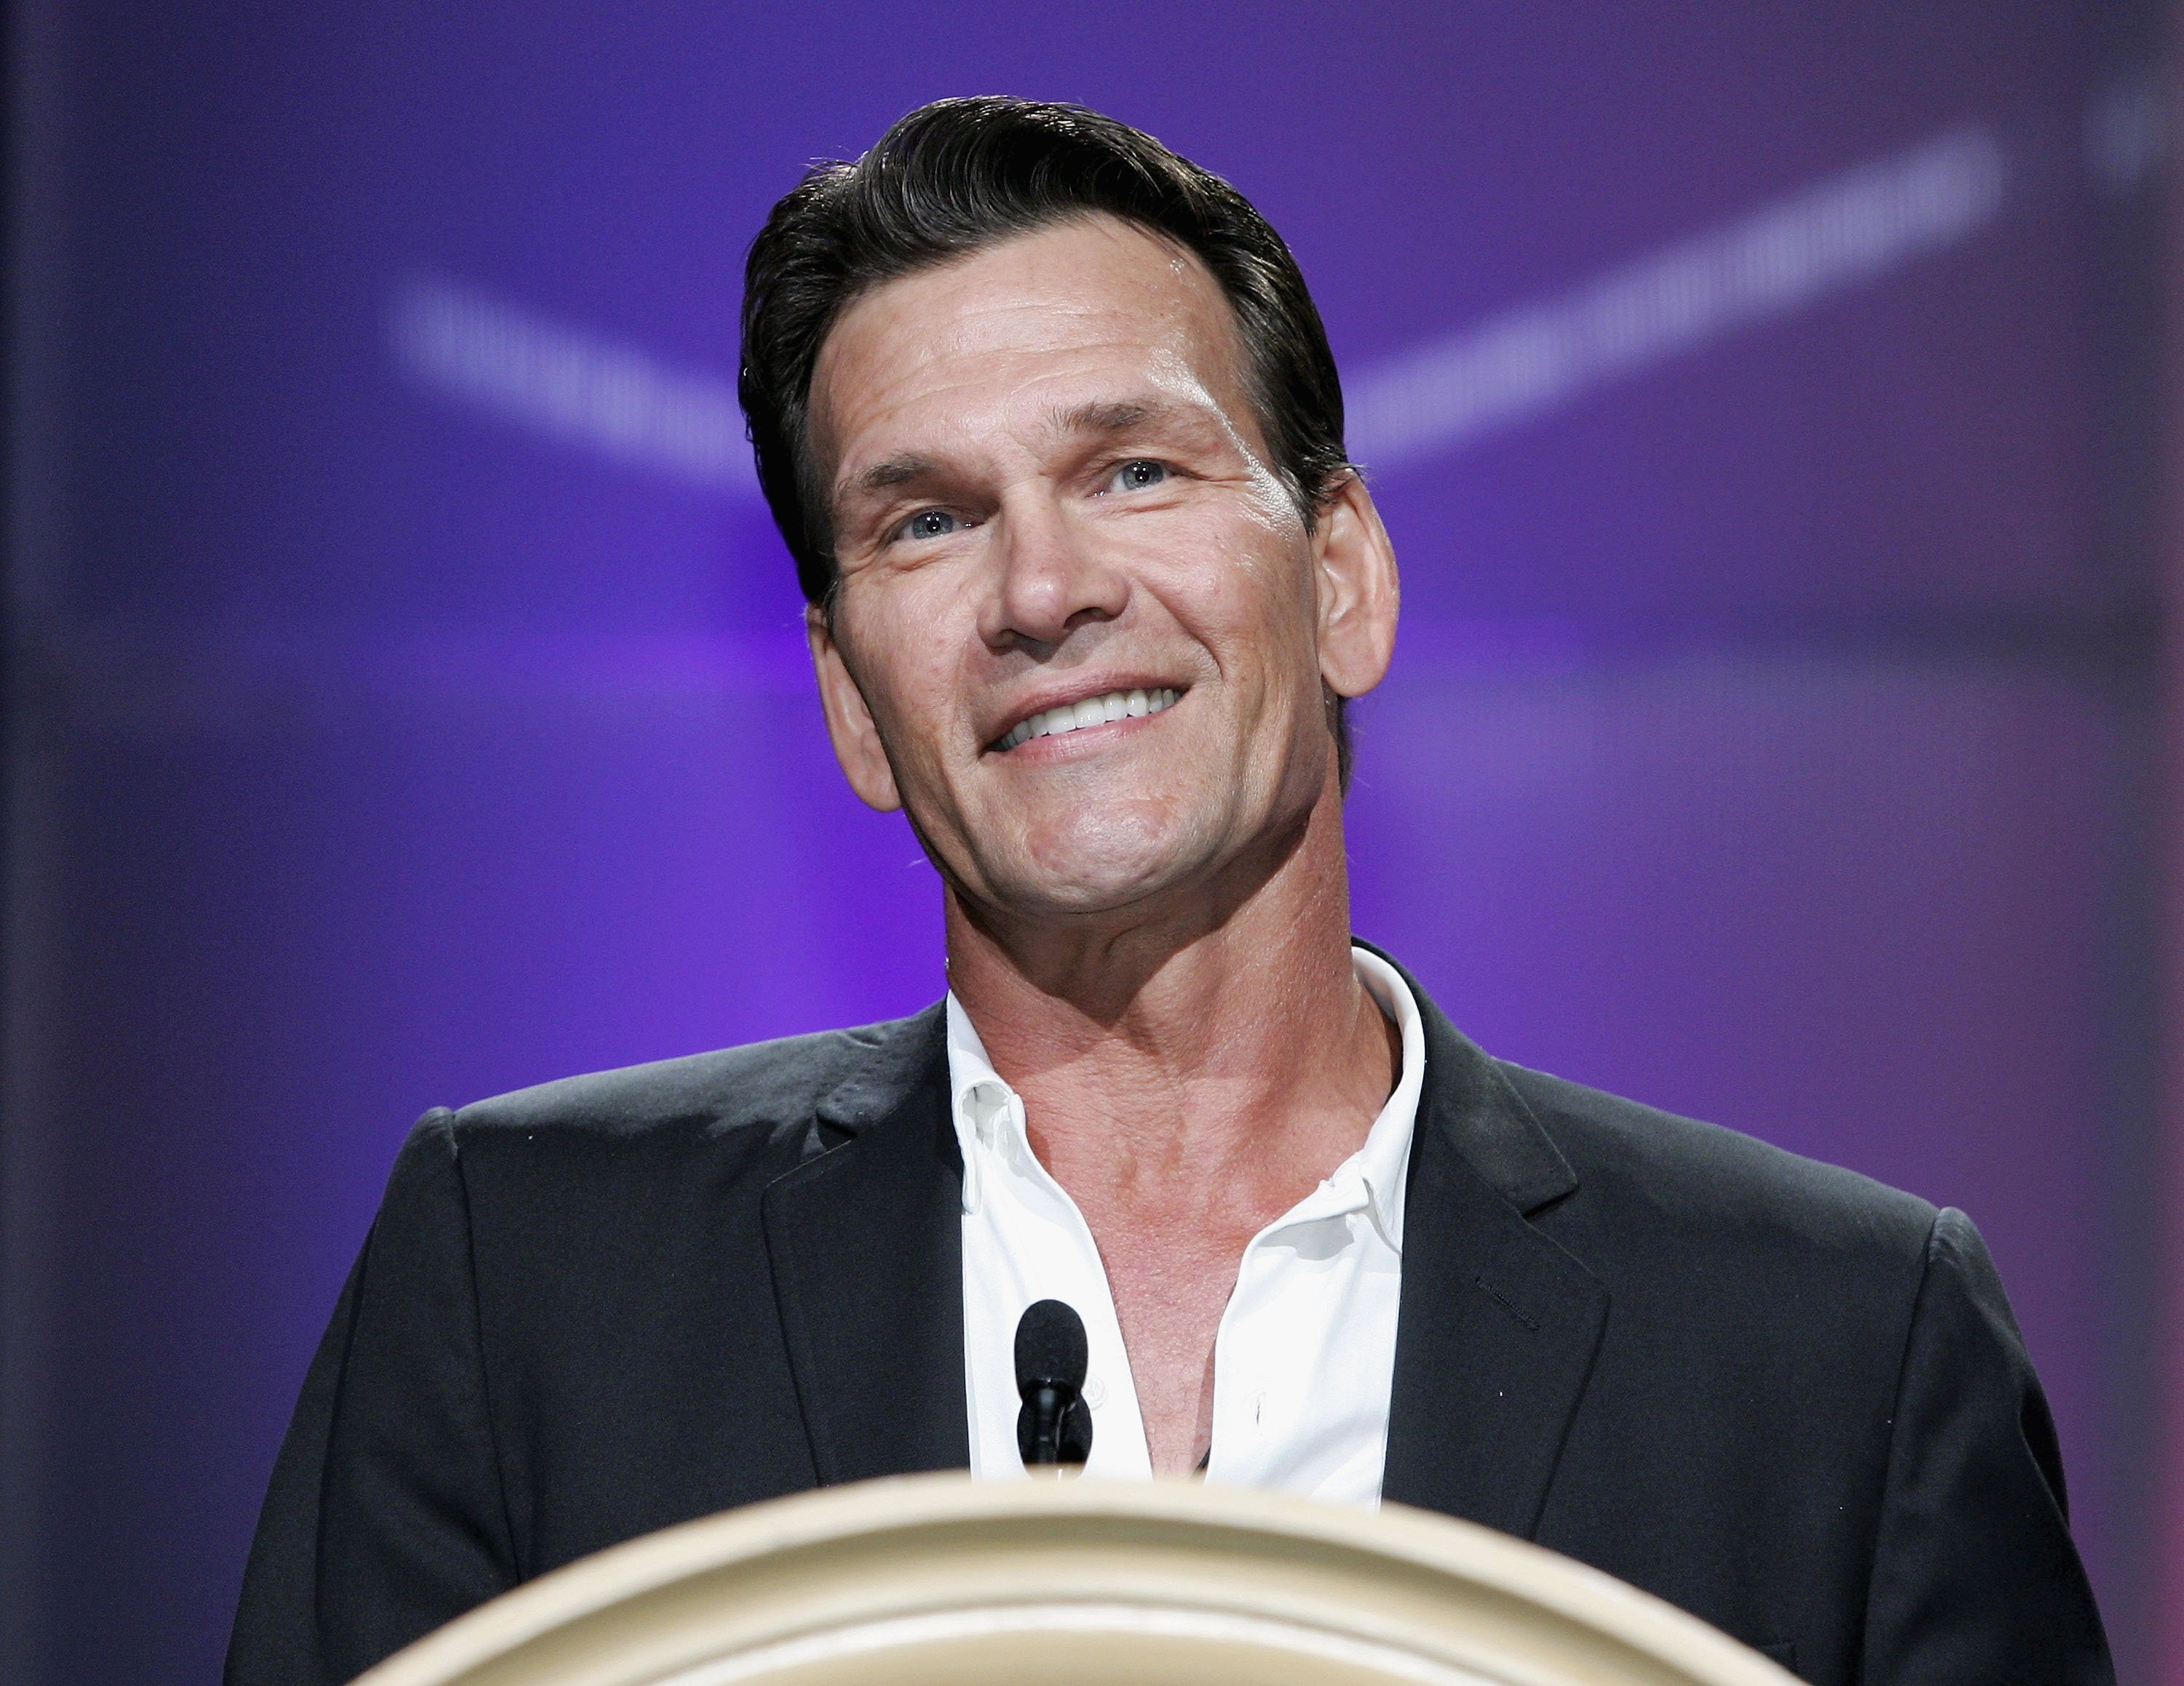 Patrick Swayze at the Video Software Dealers Association's award show at the Bellagio July 27, 2005 in Las Vegas, Nevada | Photo: Getty Images